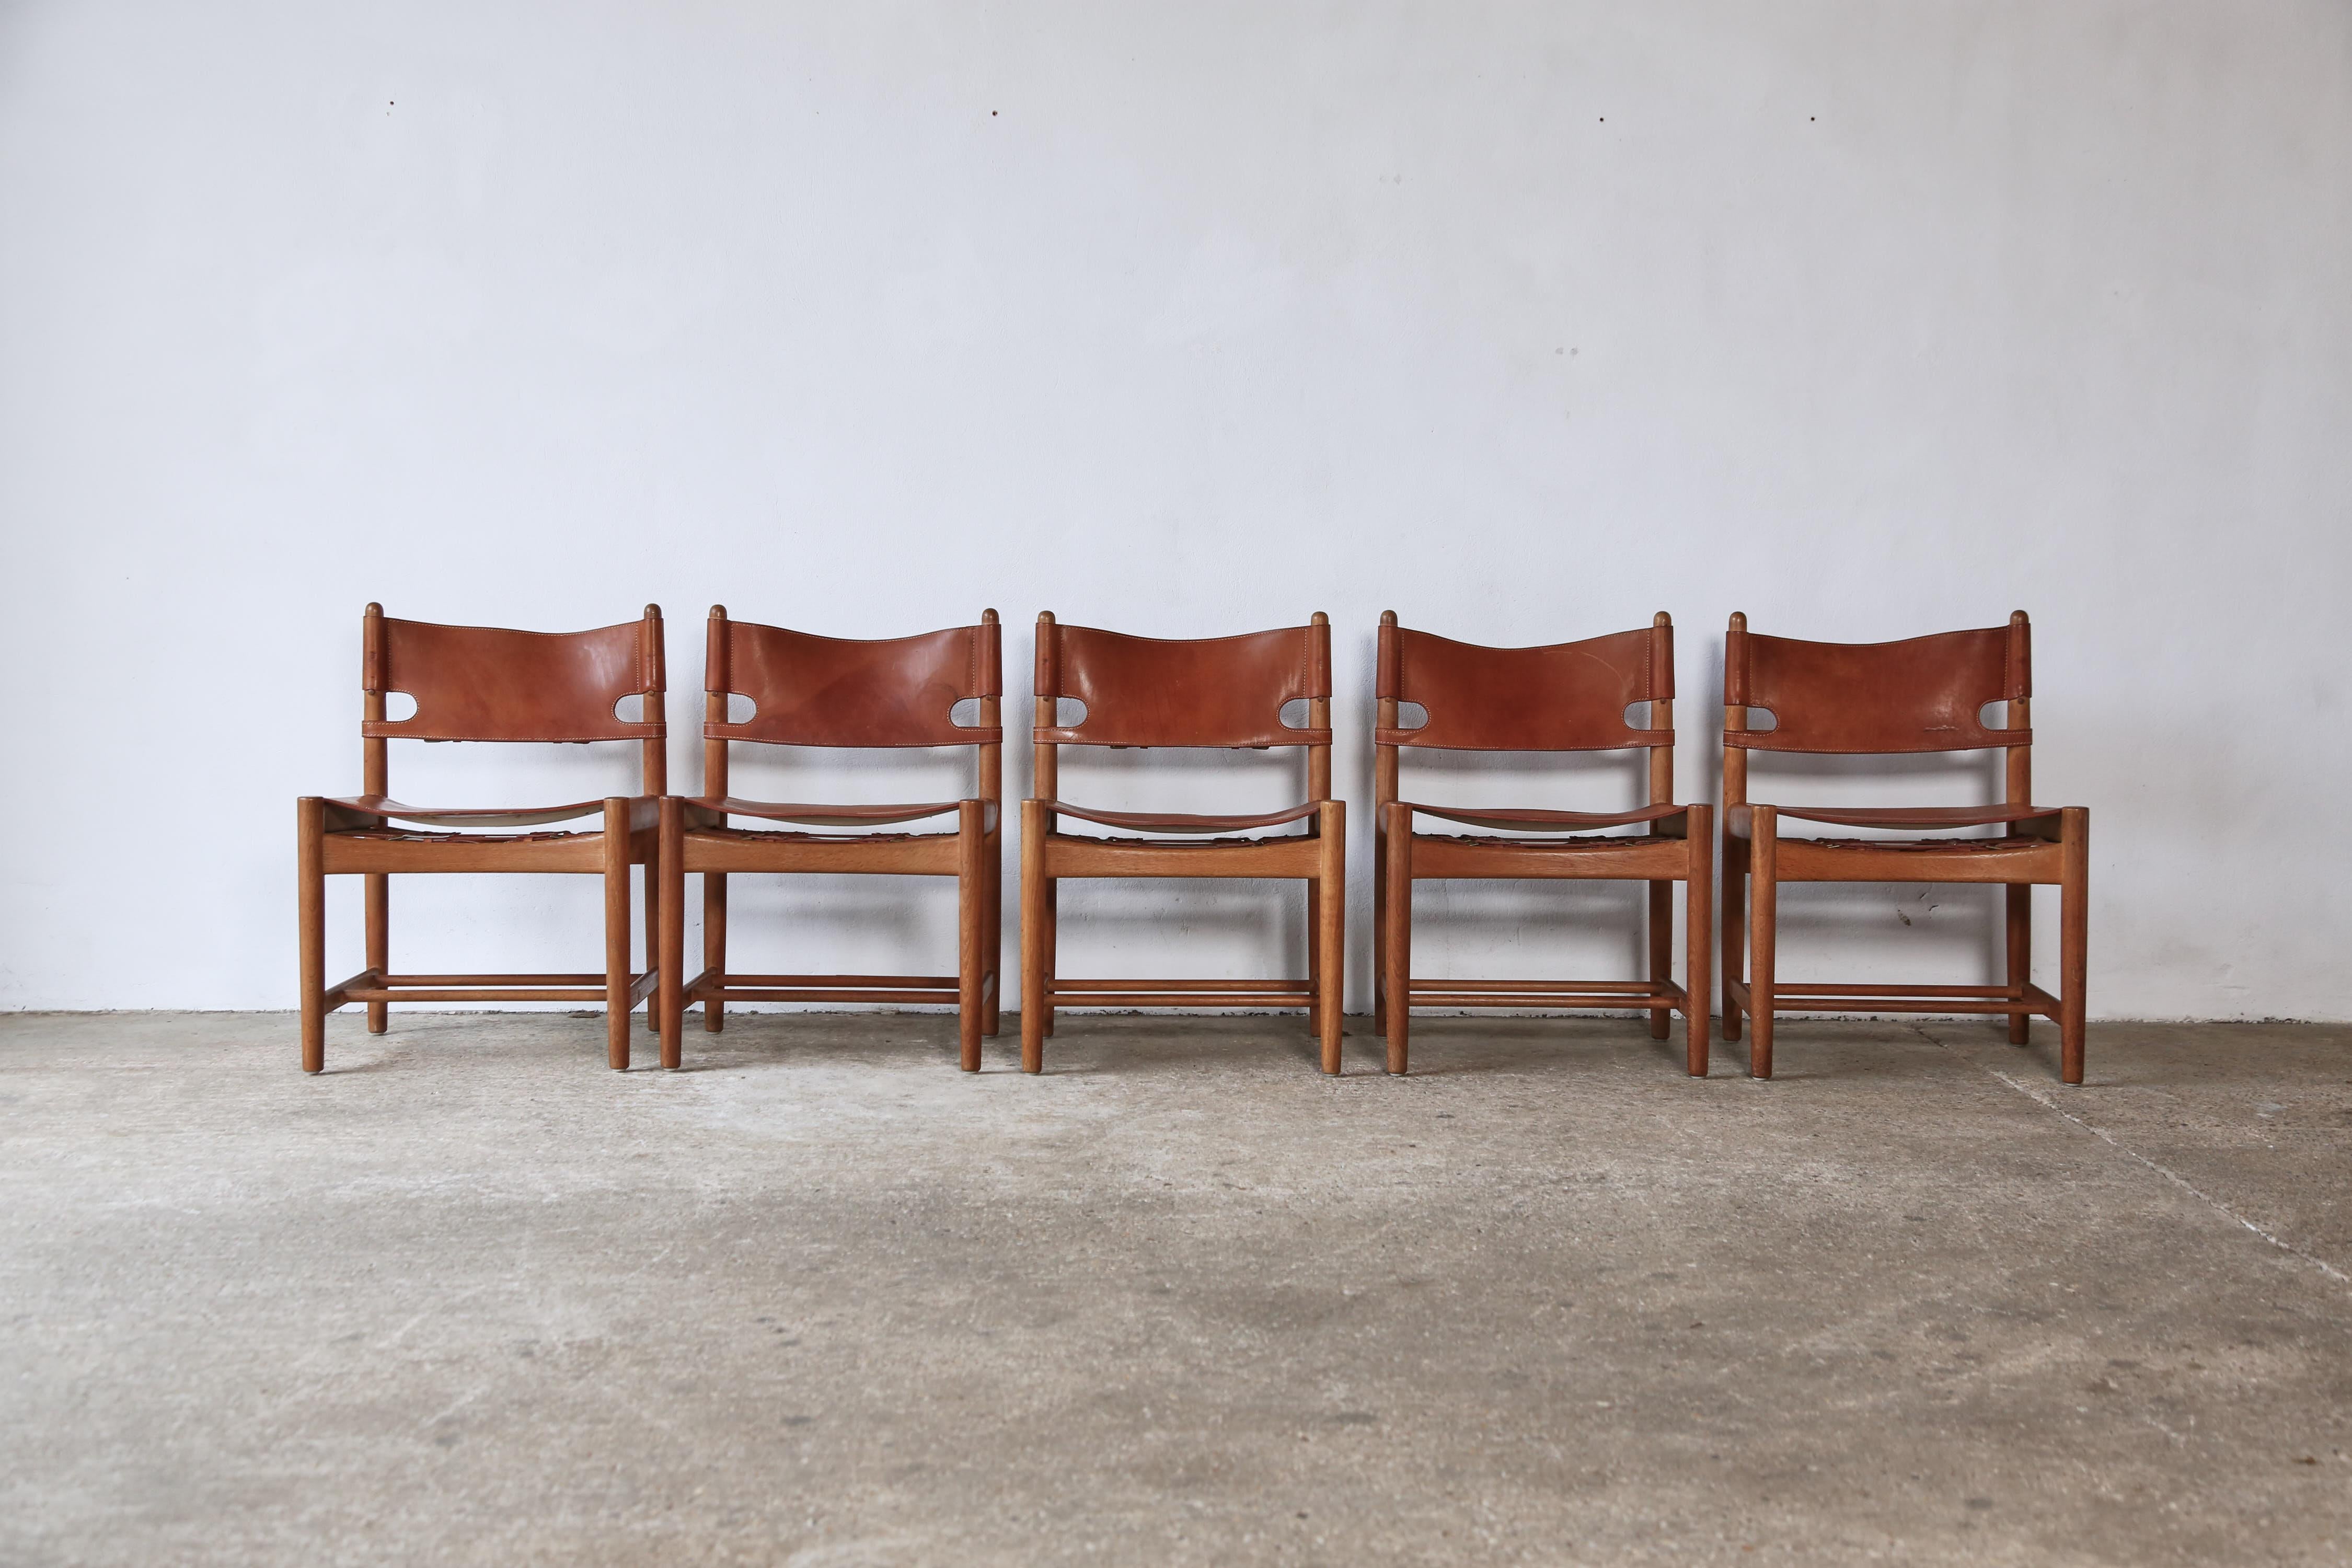 A set of five Børge Mogensen dining chairs model no. 3251 for Fredericia Furniture, with saddle leather on an oak frame, in original condition with a wonderful age and patina.  Fast shipping worldwide.   Please contact us for a competitive shipping